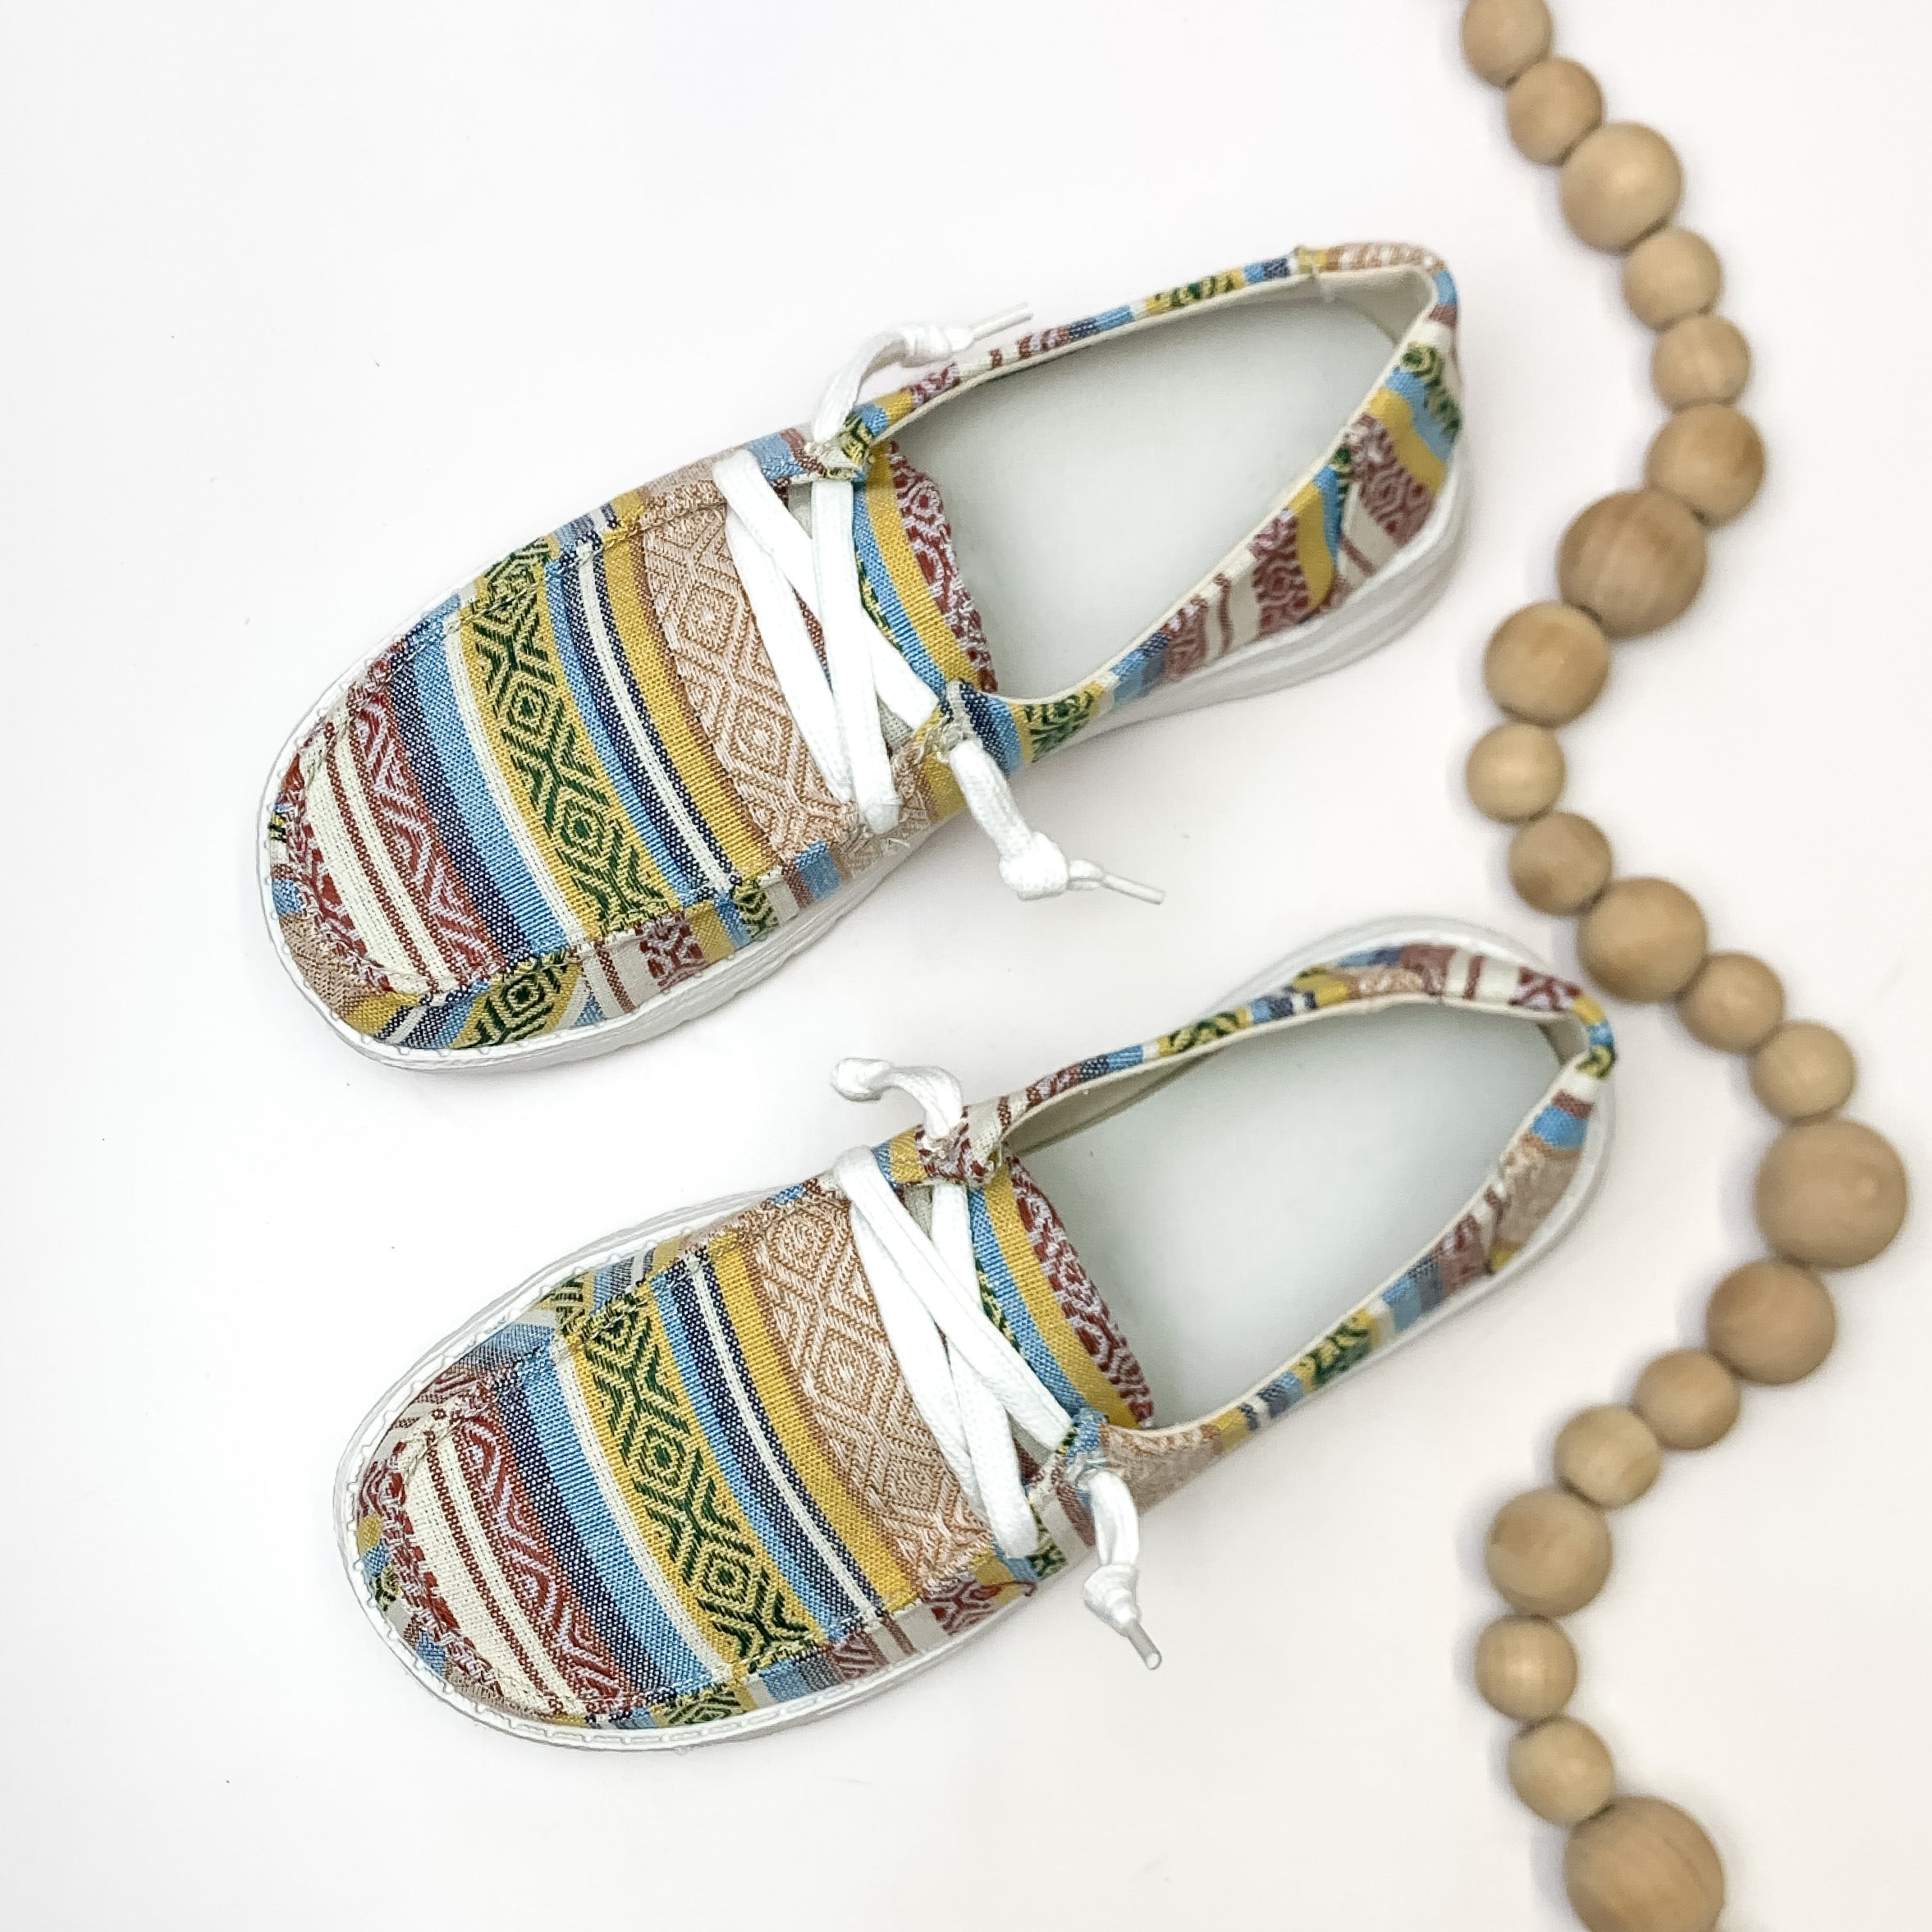 Very G | Have To Run Slip On Tribal Print Loafers with Laces in Cream Multi